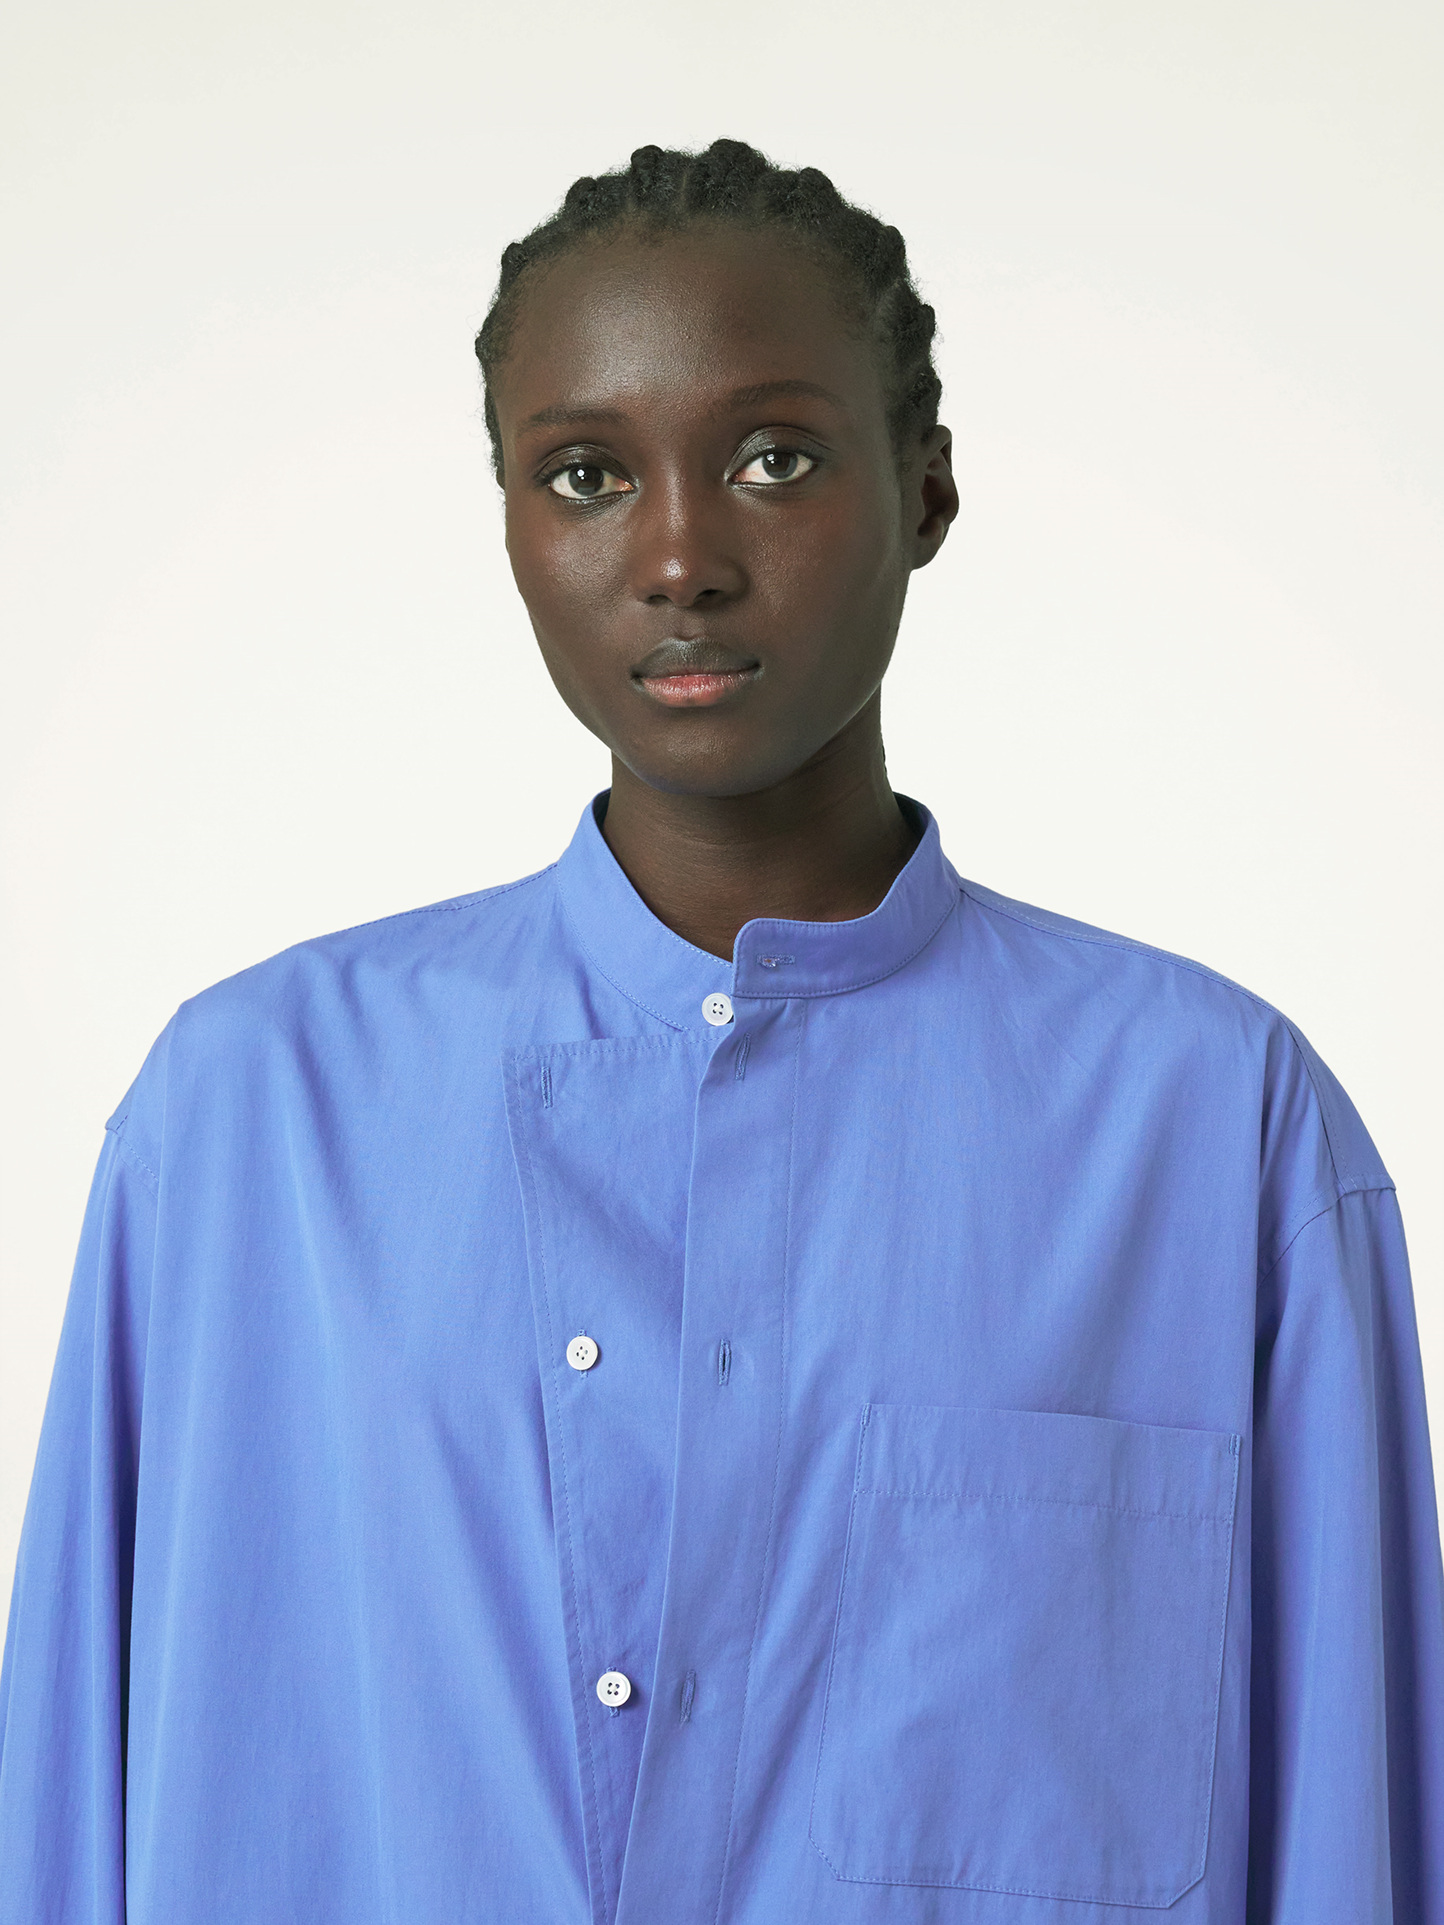 Lemaire’s cerulean shirt stands out from the crowd.